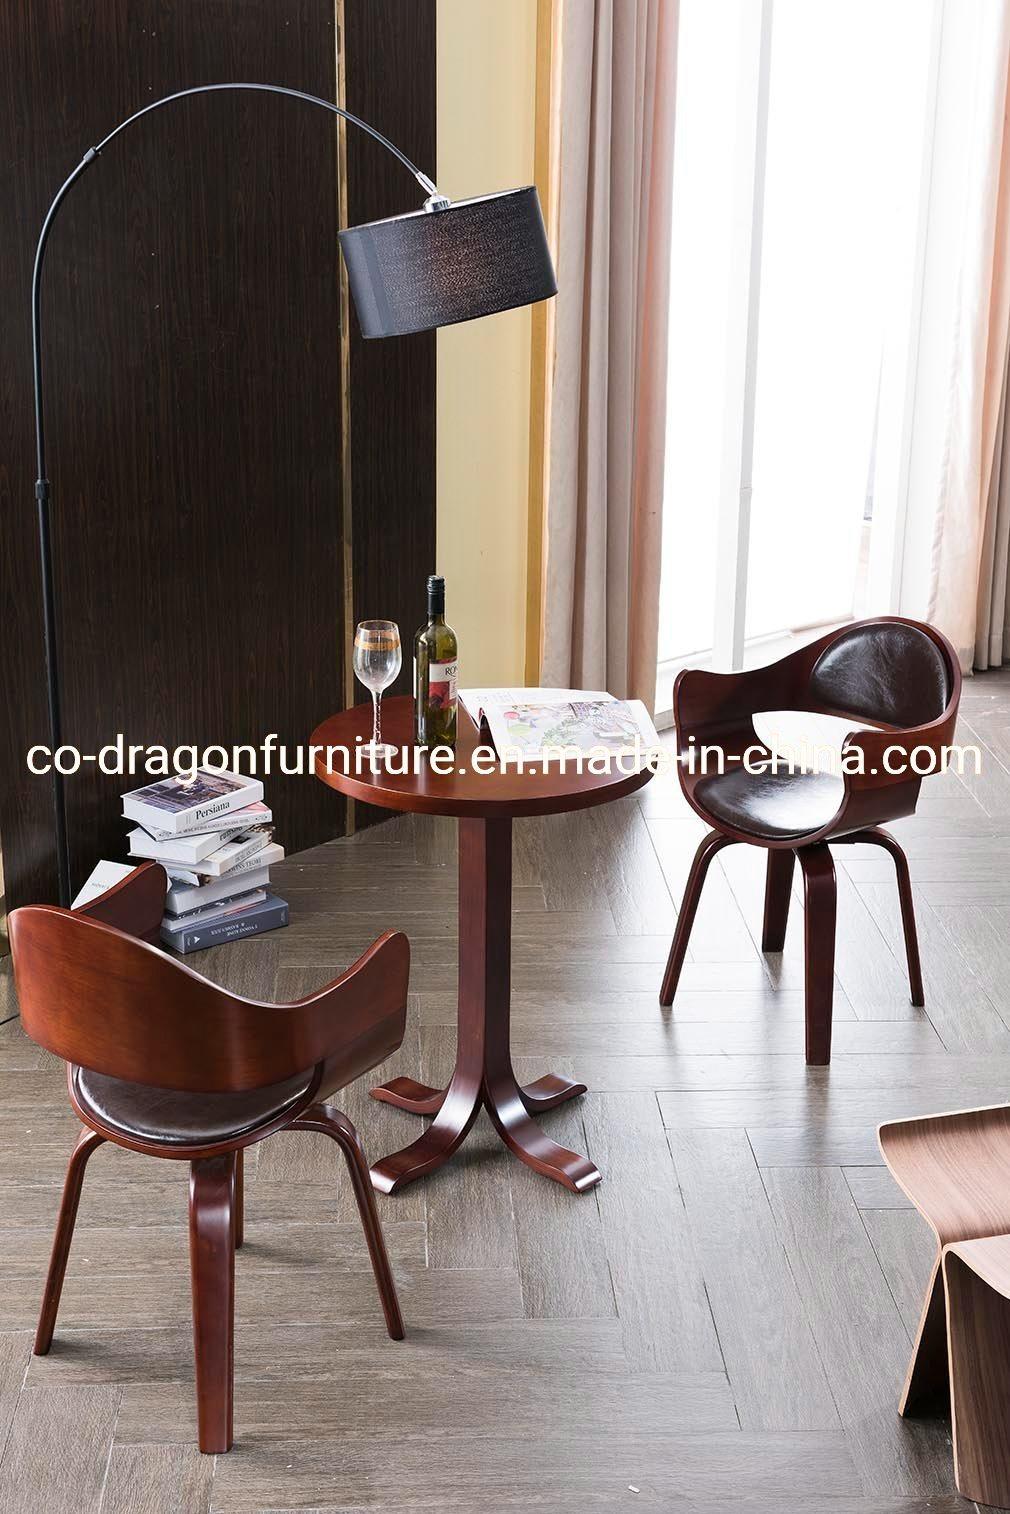 High Quality Modern Restaurant Furniture Leather Wood Swivel Dining Chair